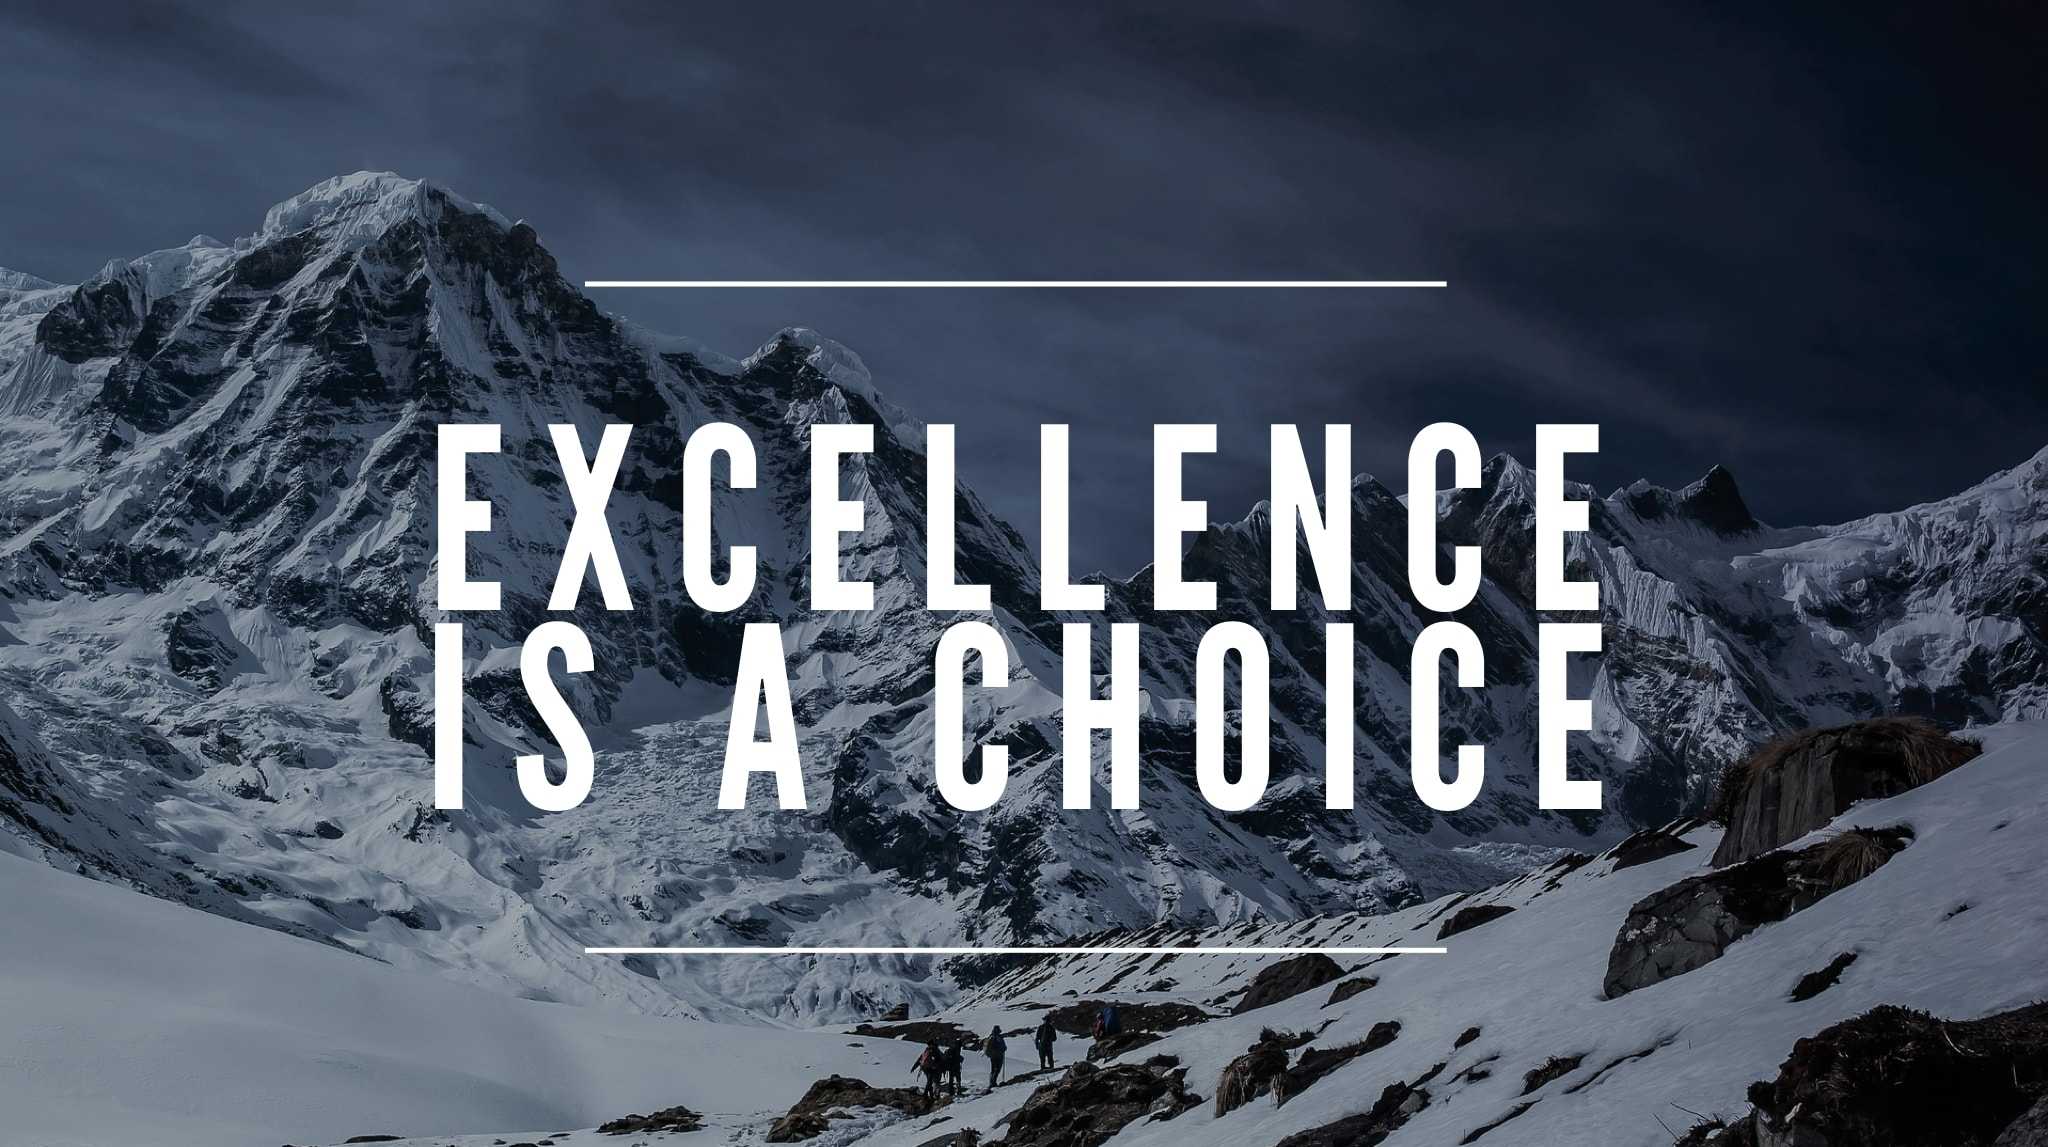 Excellence is a choice